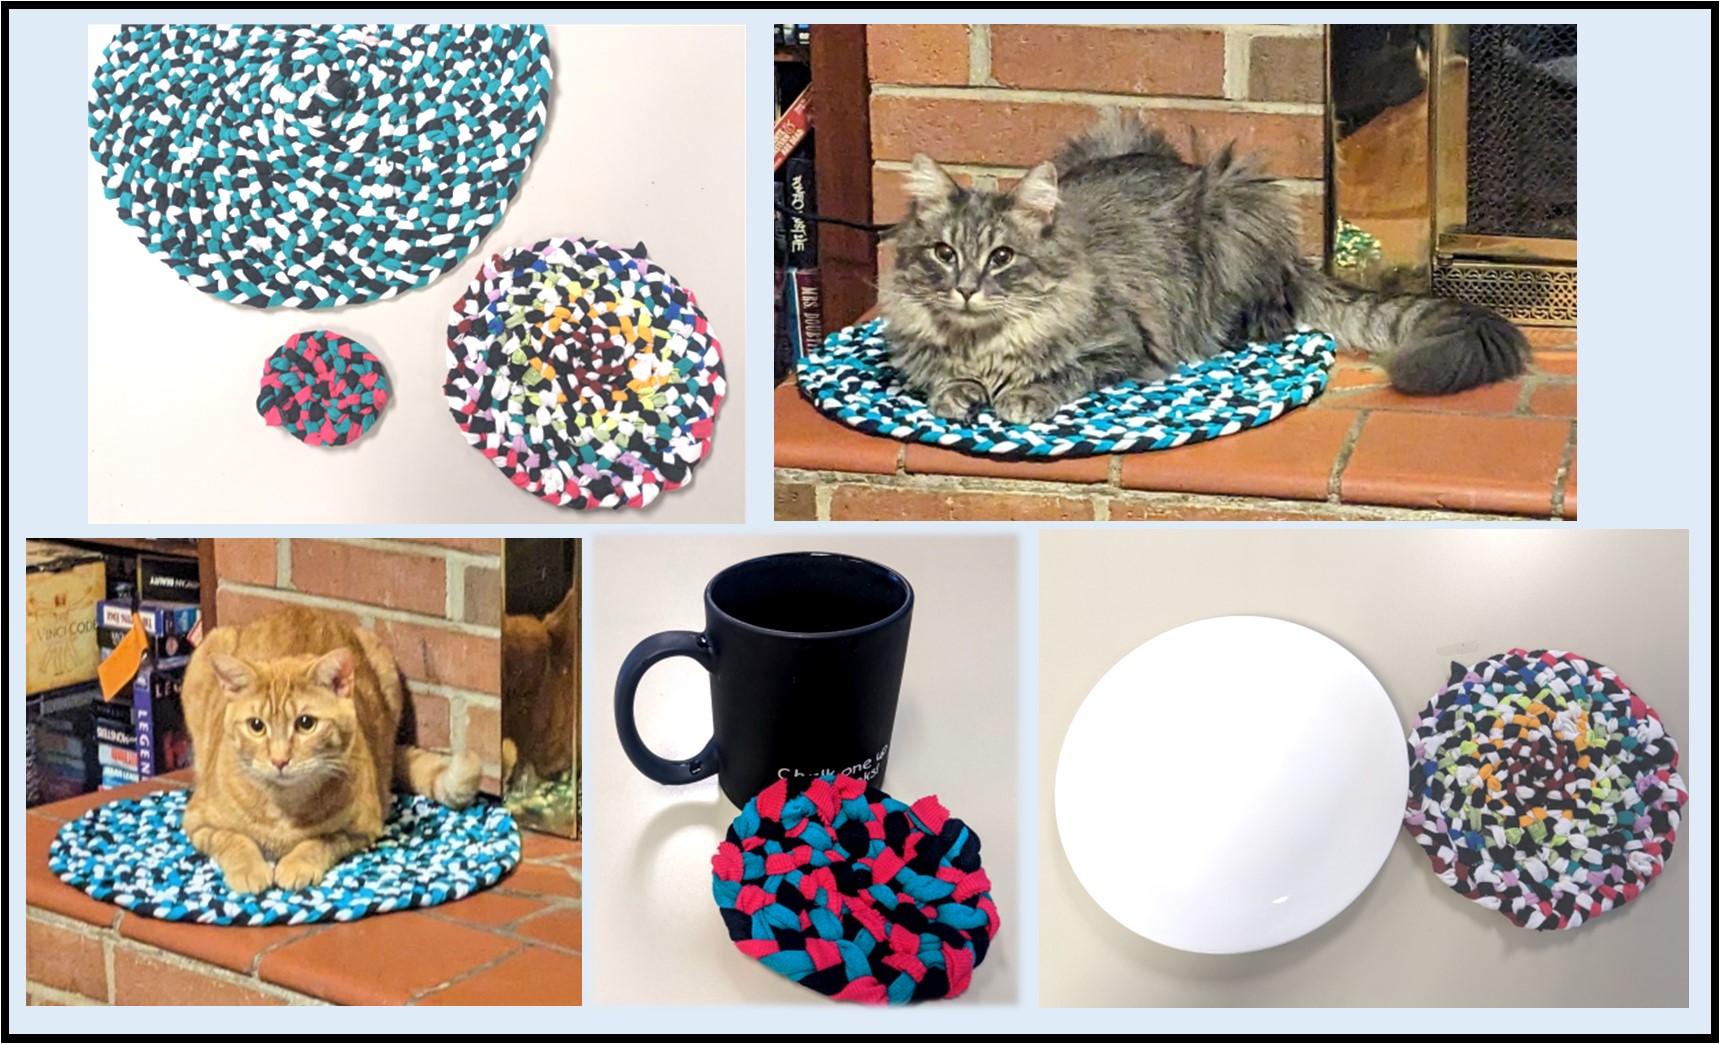 3 different t-shirt braided projects, gray fluffy cat on a rug, orange cat on a rug, black mug and coaster, and white plate with mat